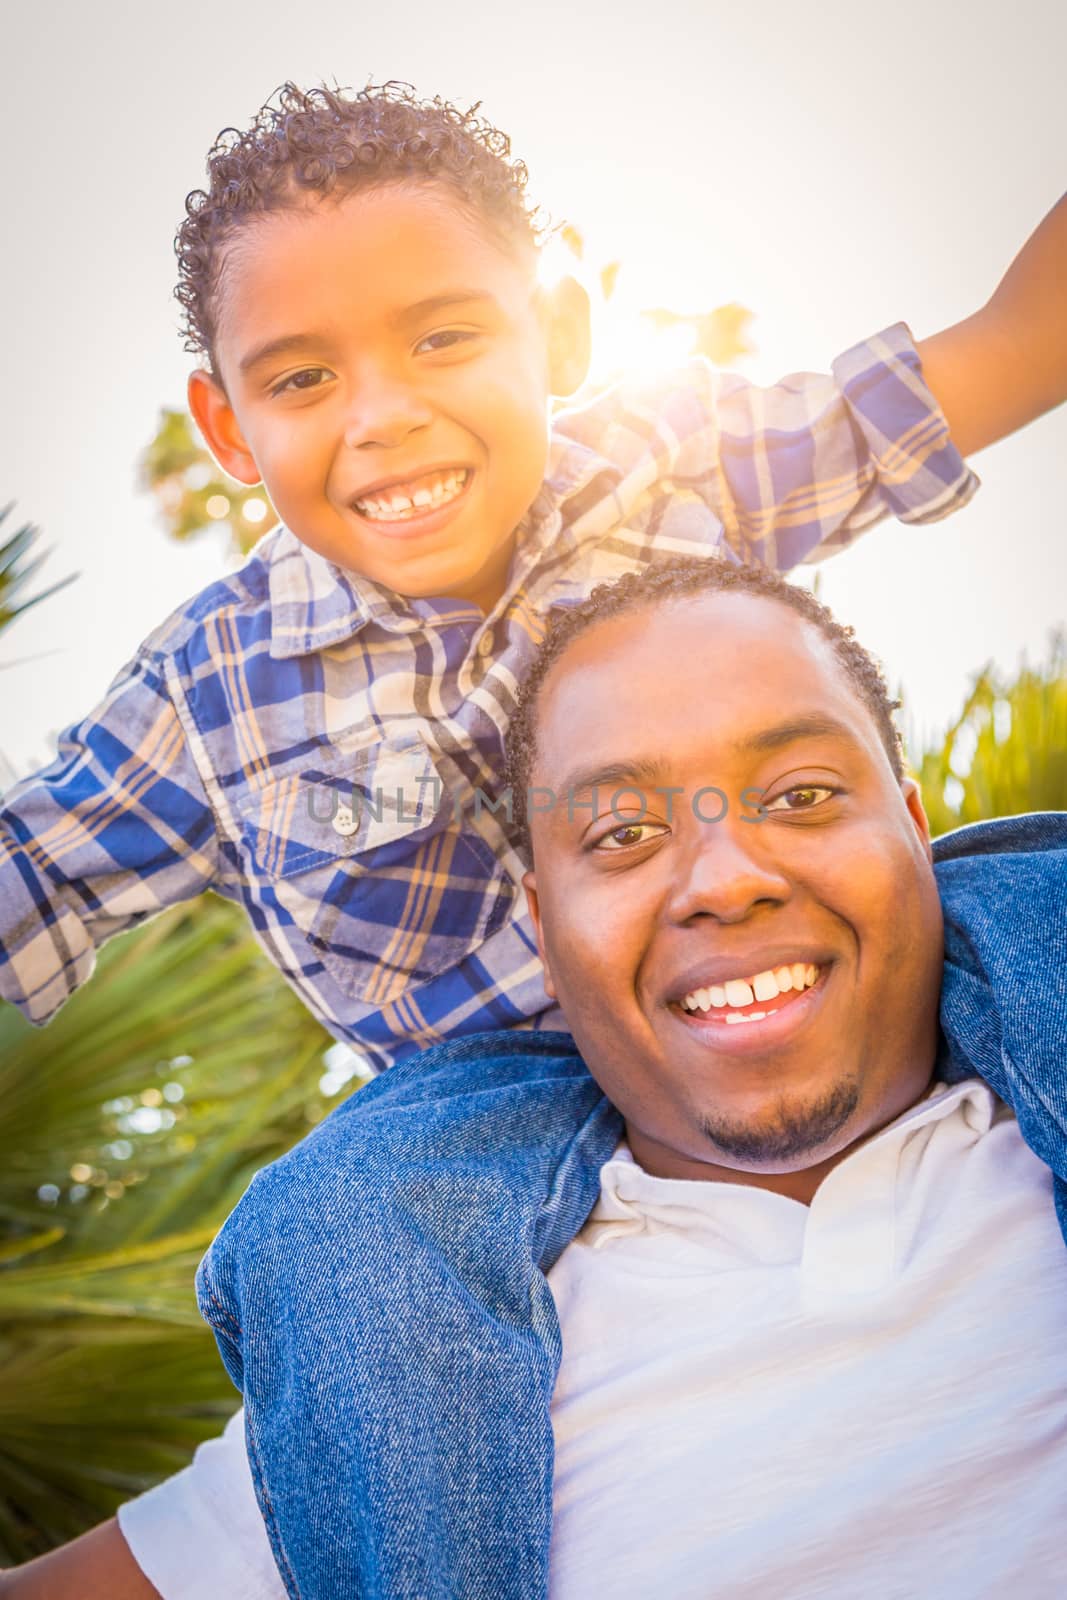 Mixed Race Son and African American Father Playing Piggyback Outdoors Together.